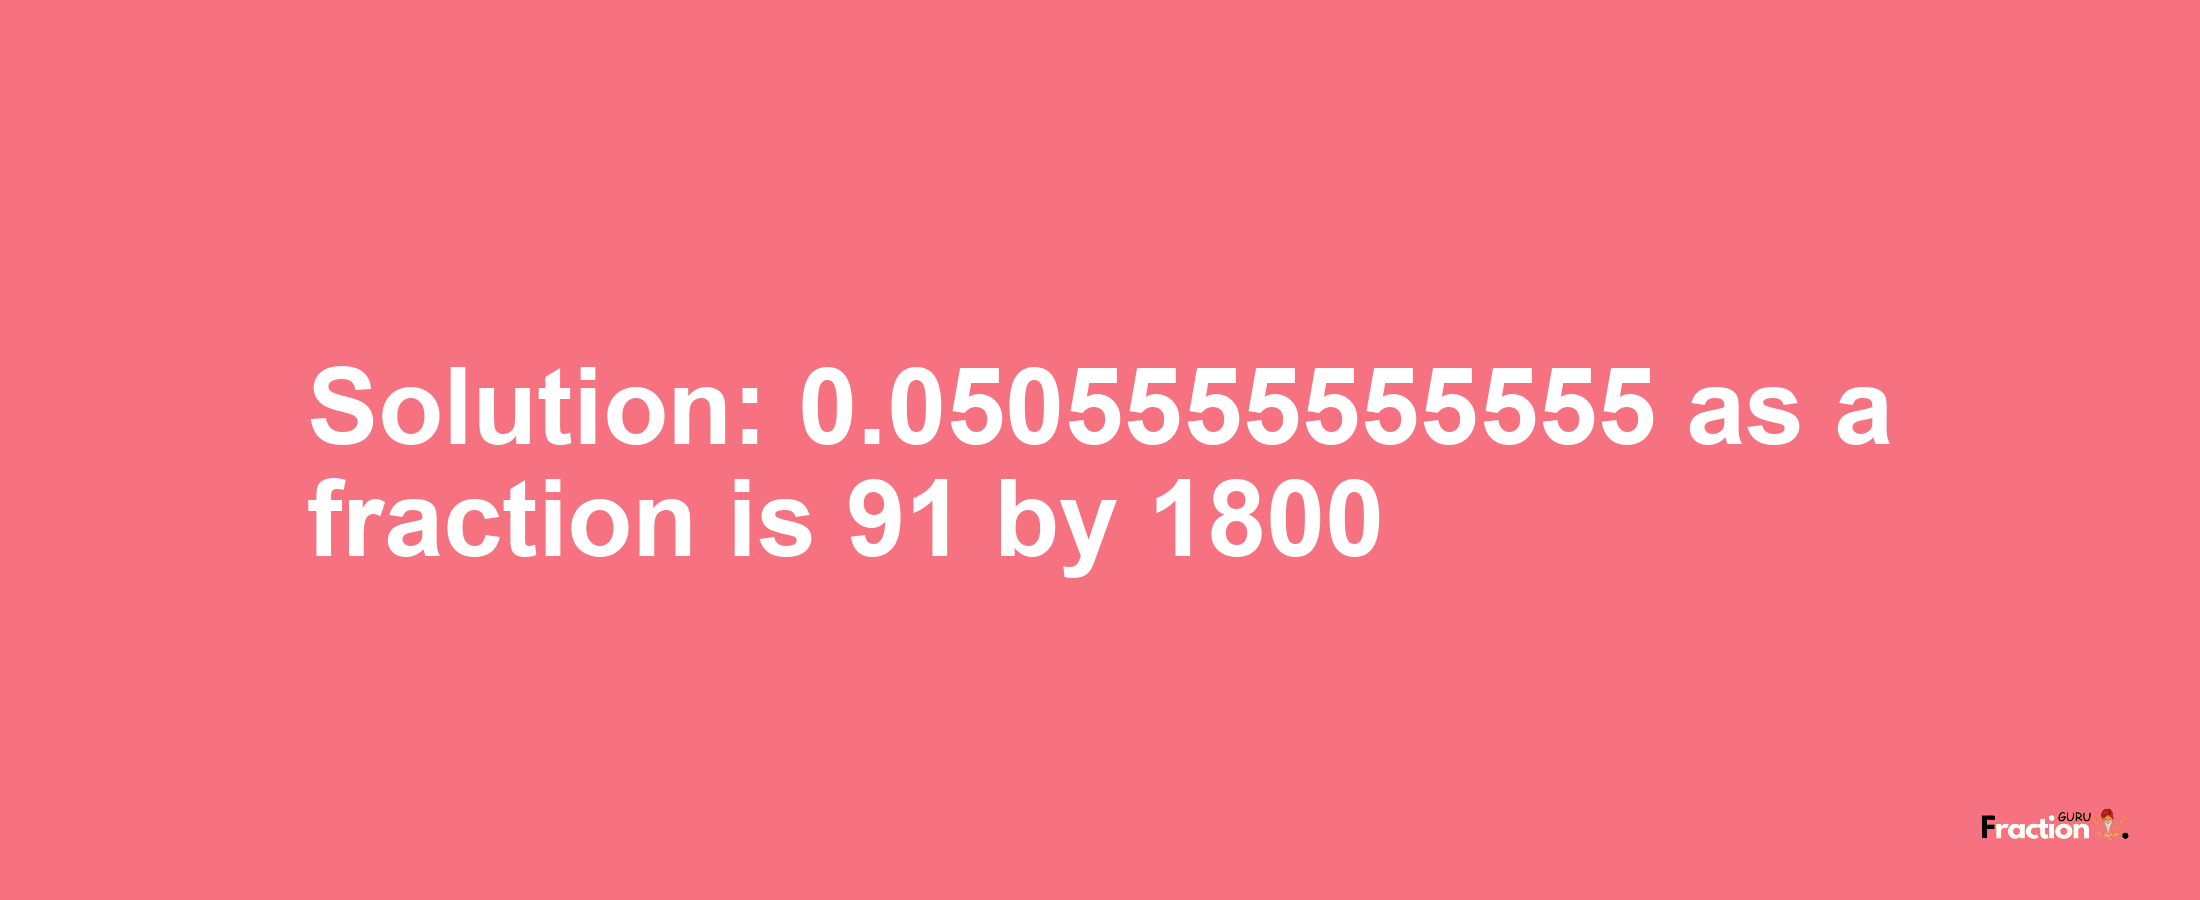 Solution:0.0505555555555 as a fraction is 91/1800